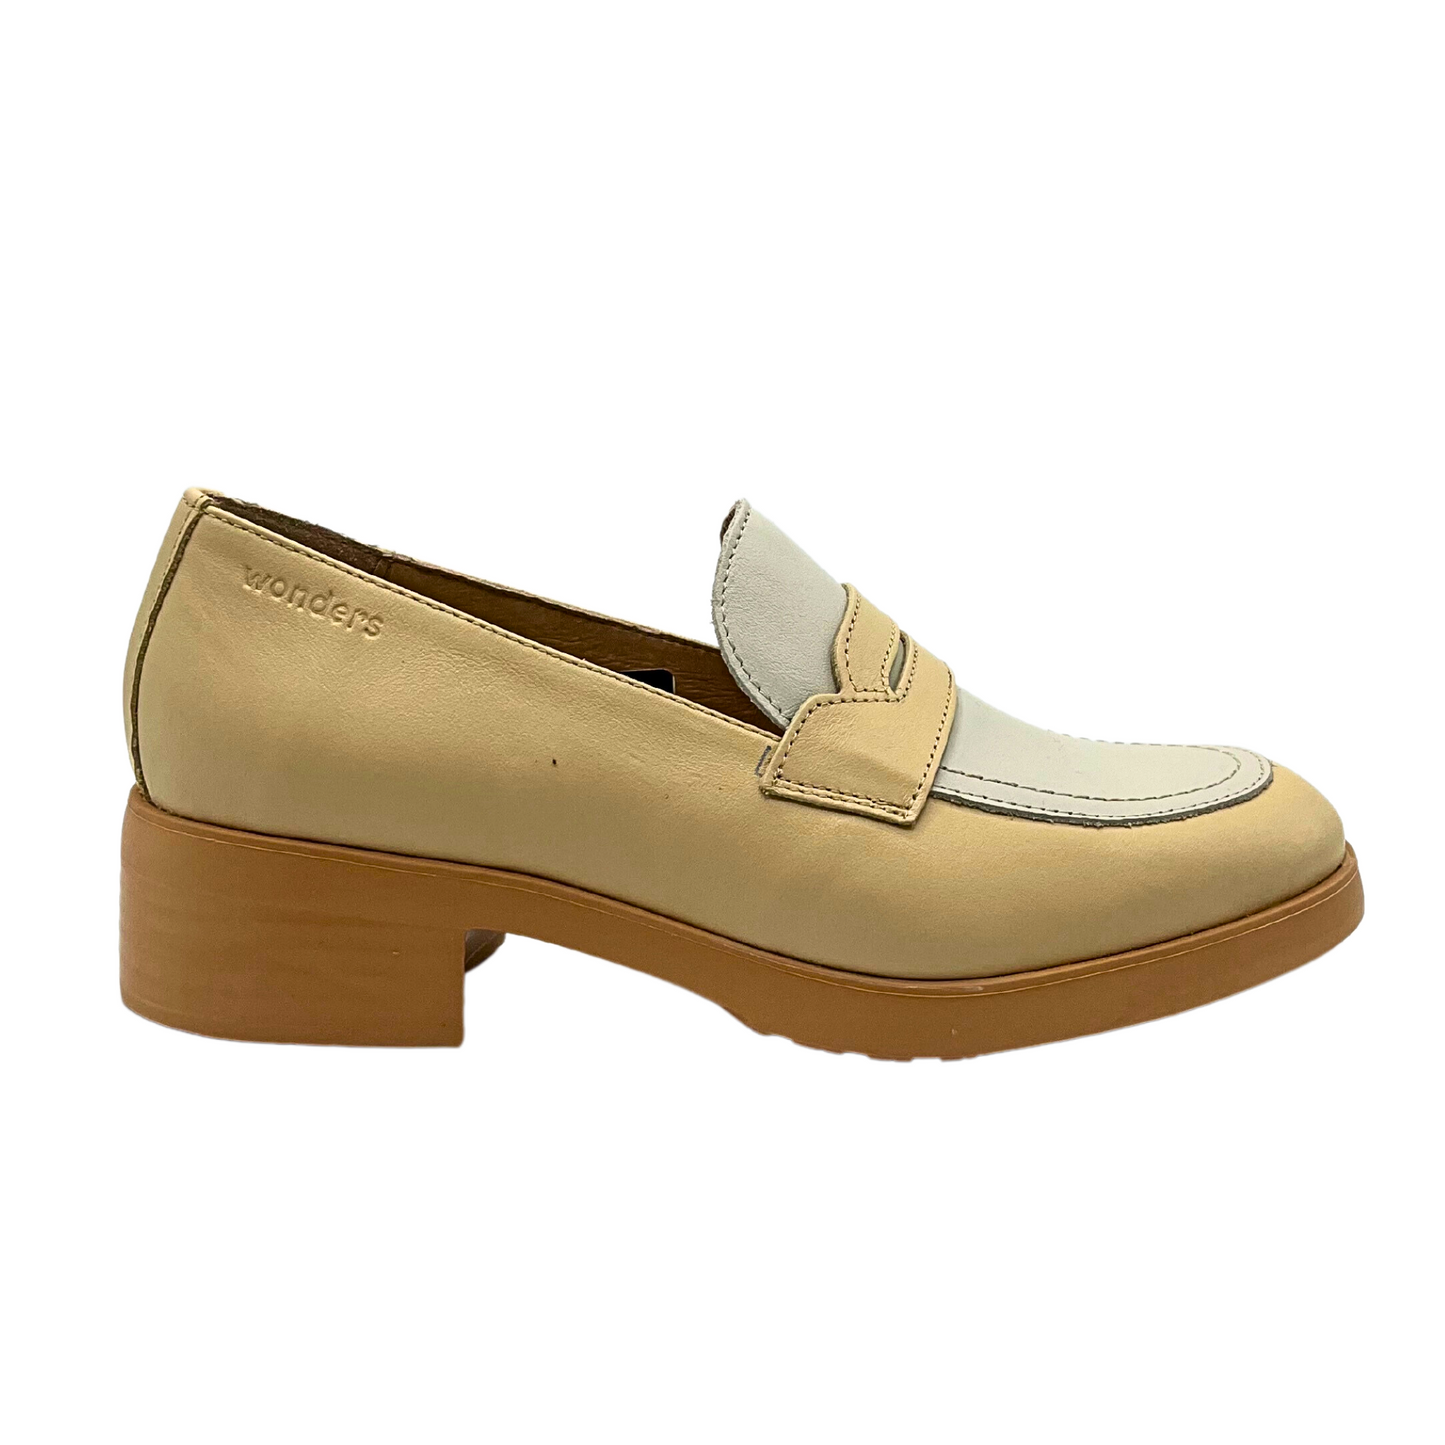 Outside view of a slip on loafer.  Simple, smart style